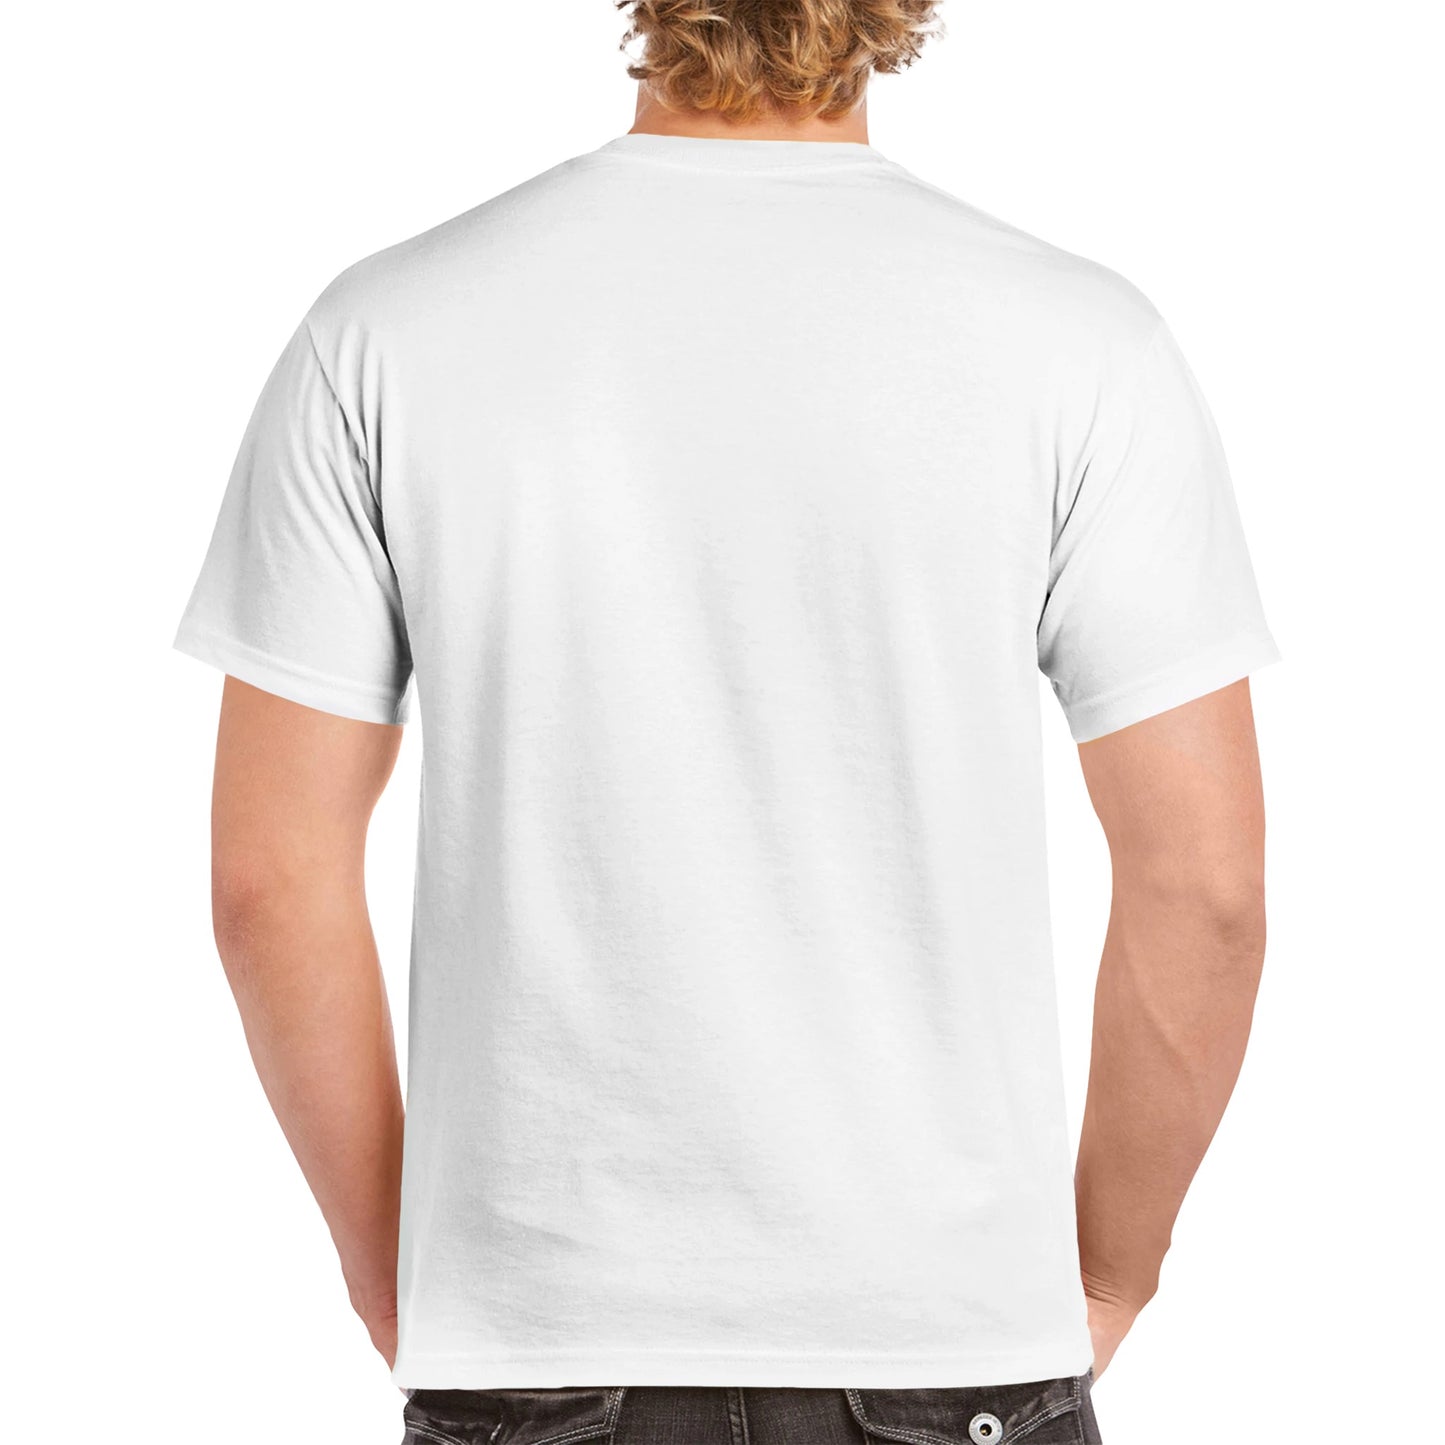 A white comfortable Unisex Crewneck heavyweight cotton t-shirt with funny saying It’s PickleBall Baby if can’t stand the heat – Don’t get burned in the Kitchen!  and Let’s Play Pickleball logo on the front from WhatYa Say Apparel worn by blonde-haired male rear view.